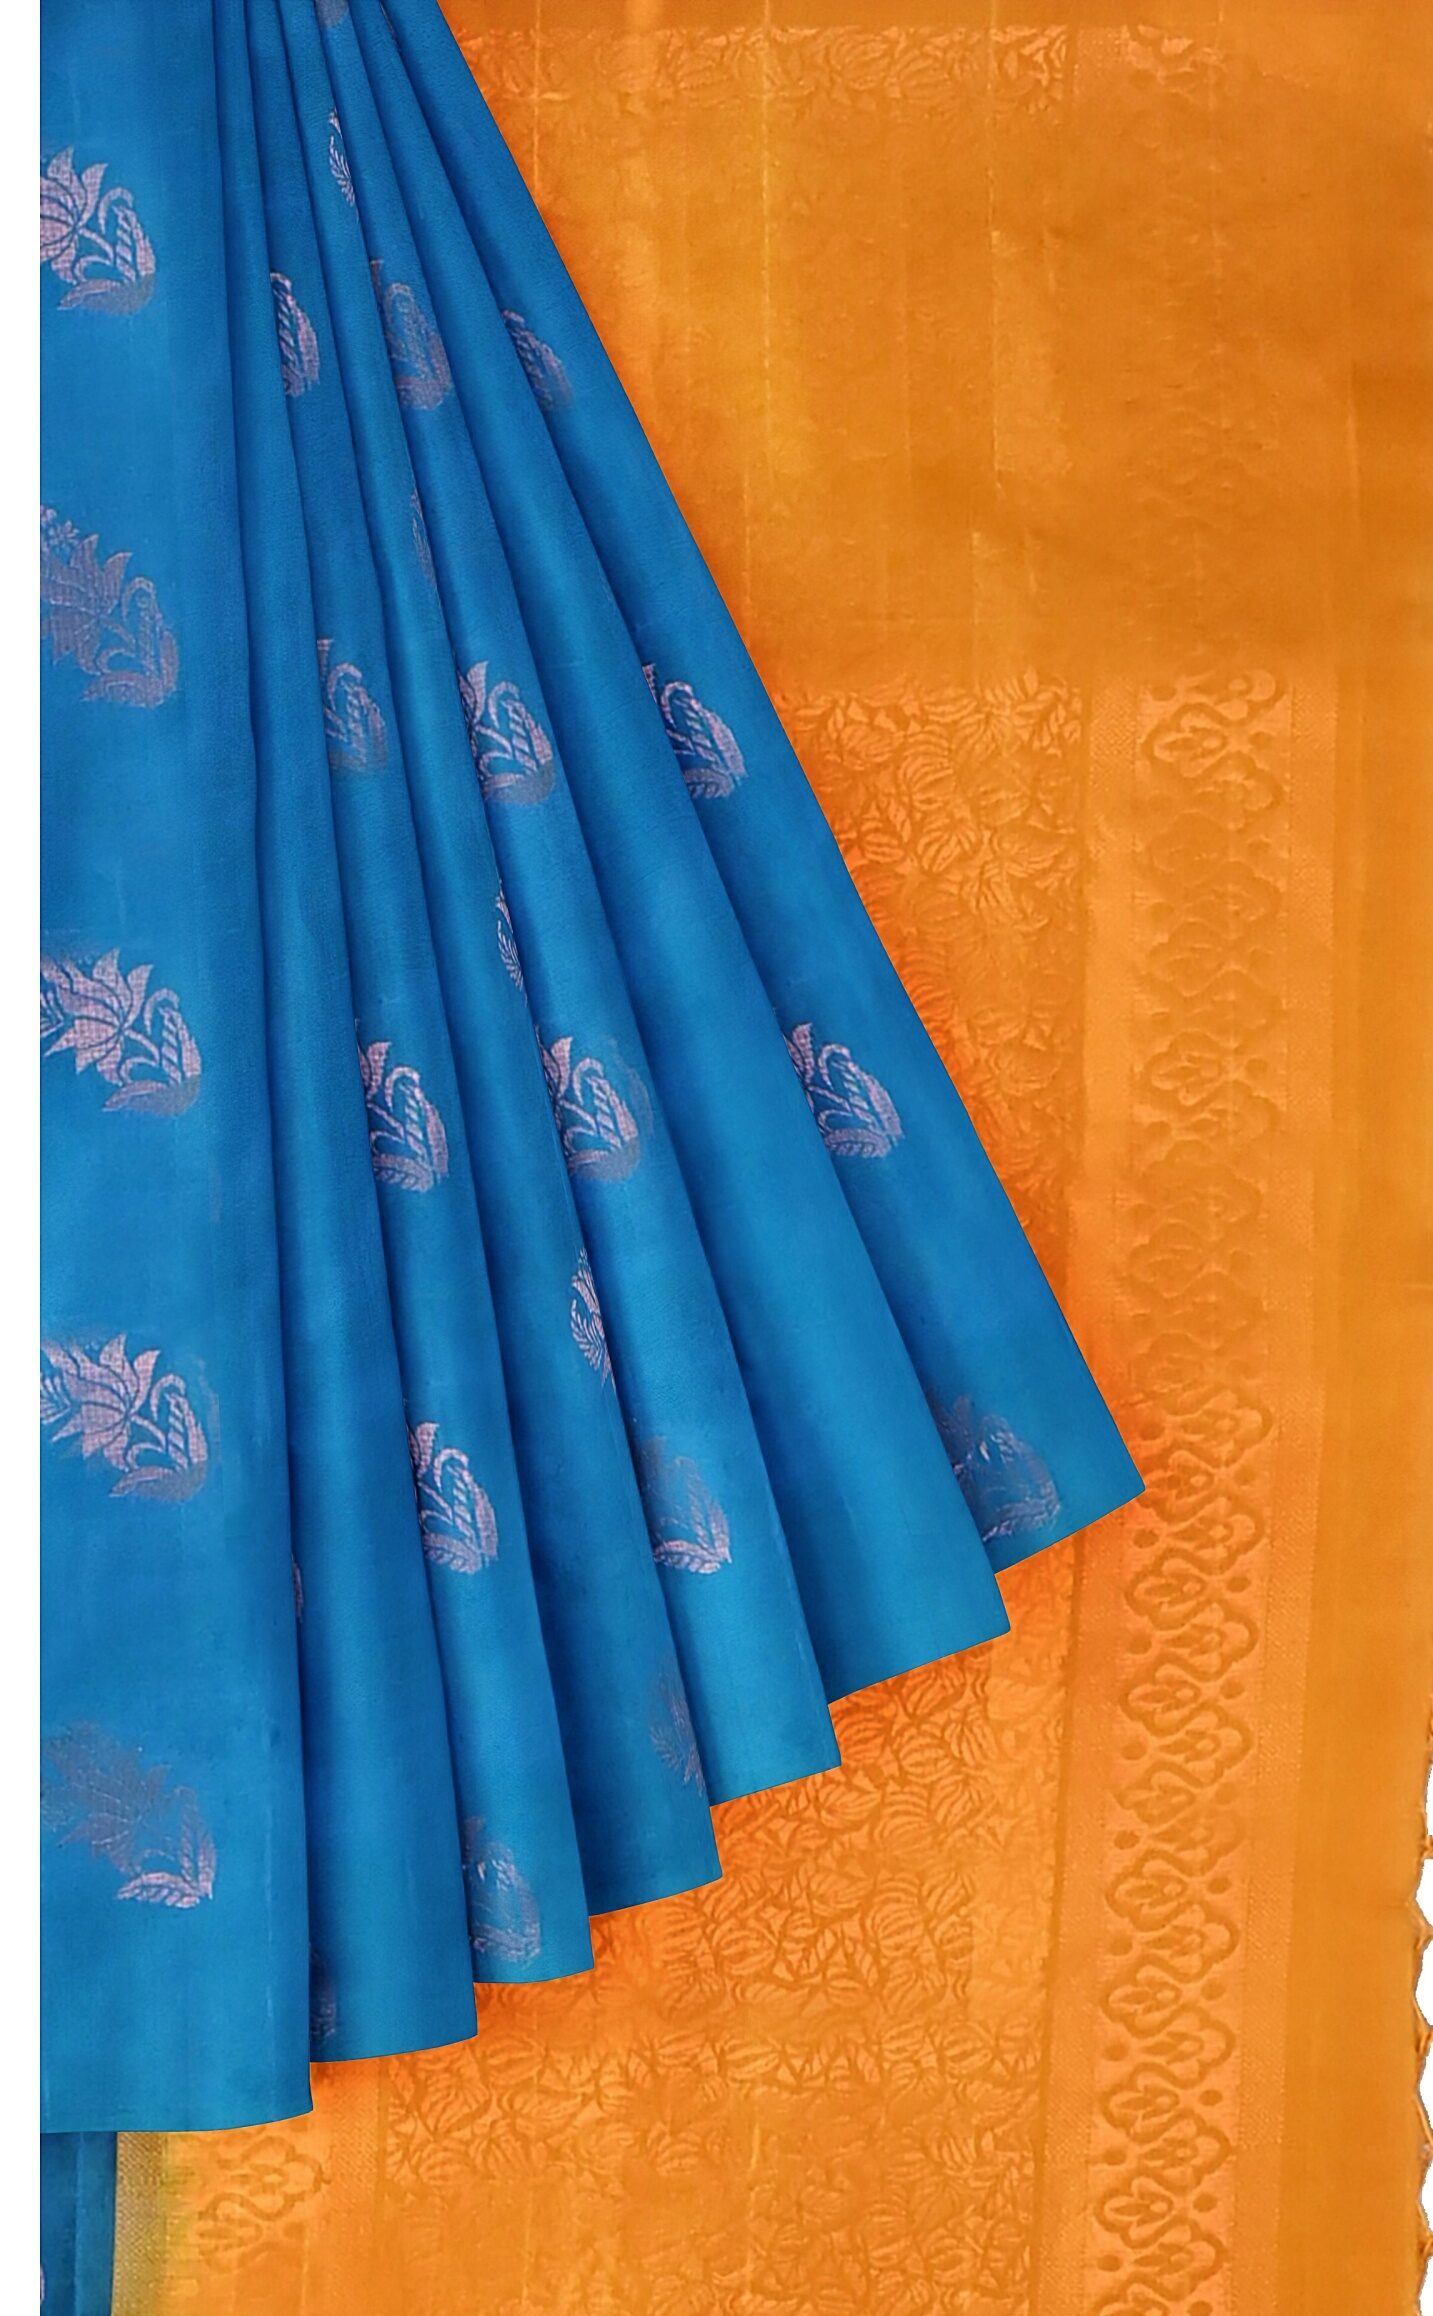 Buy TENDRY STYLISH LINEN SLUB WITHOUT PALLU,PLANE SAREE WITH CONTRAST BLOUE  2 INCH BORDER at Amazon.in